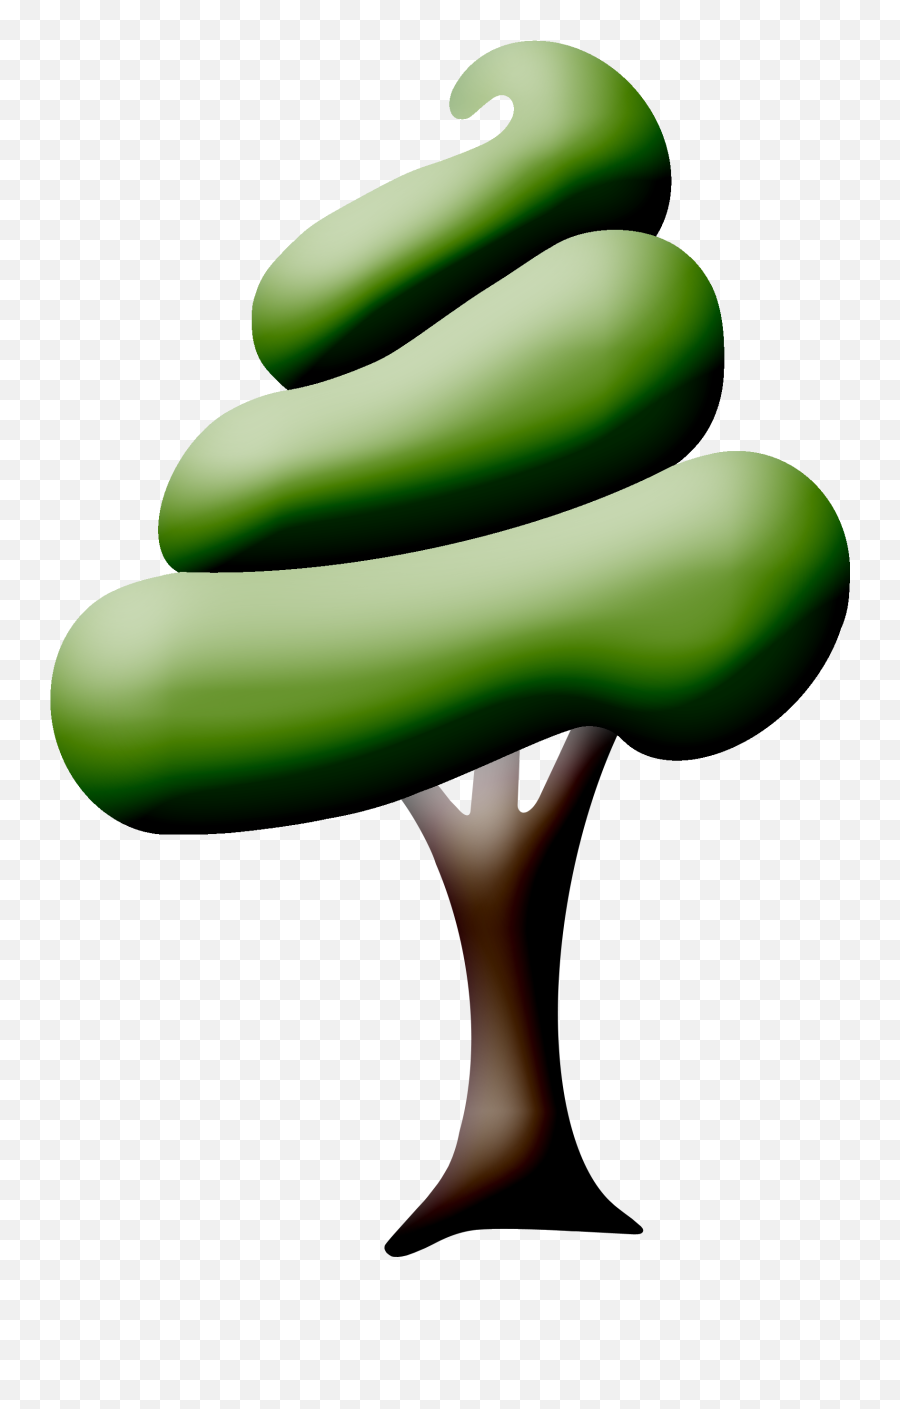 Tree Clip Art - Tree Png Download Full Size Clipart Cucumber,Willow Tree Png